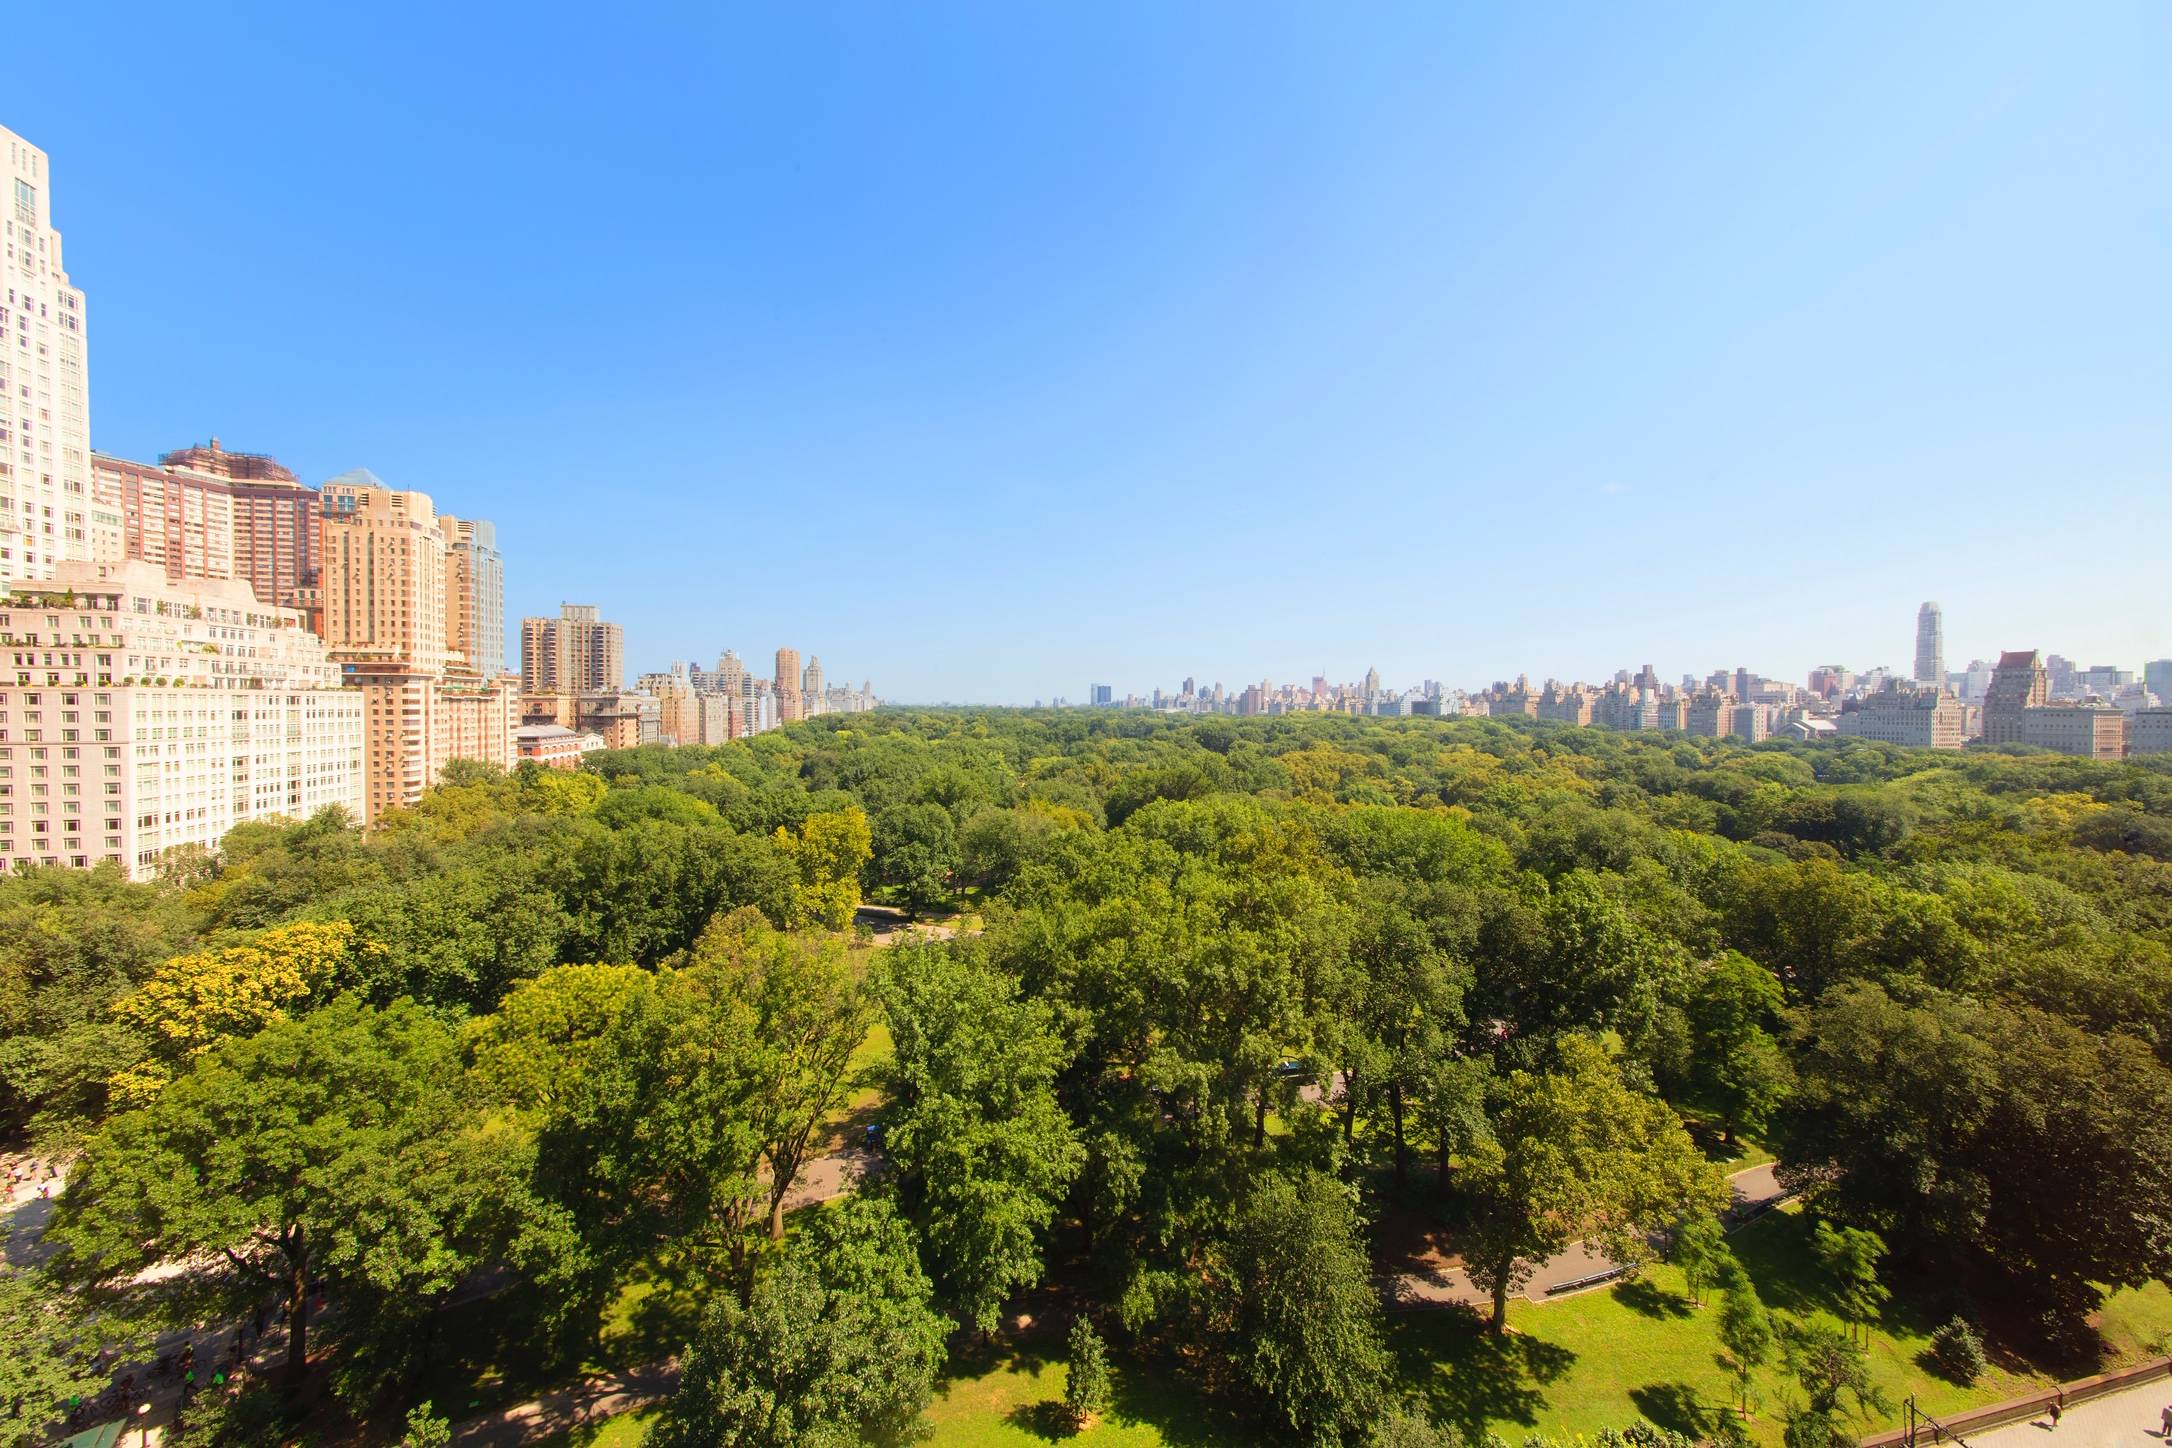 Duplex Penthouse with nearly 100 feet of frontage directly on Central Park South